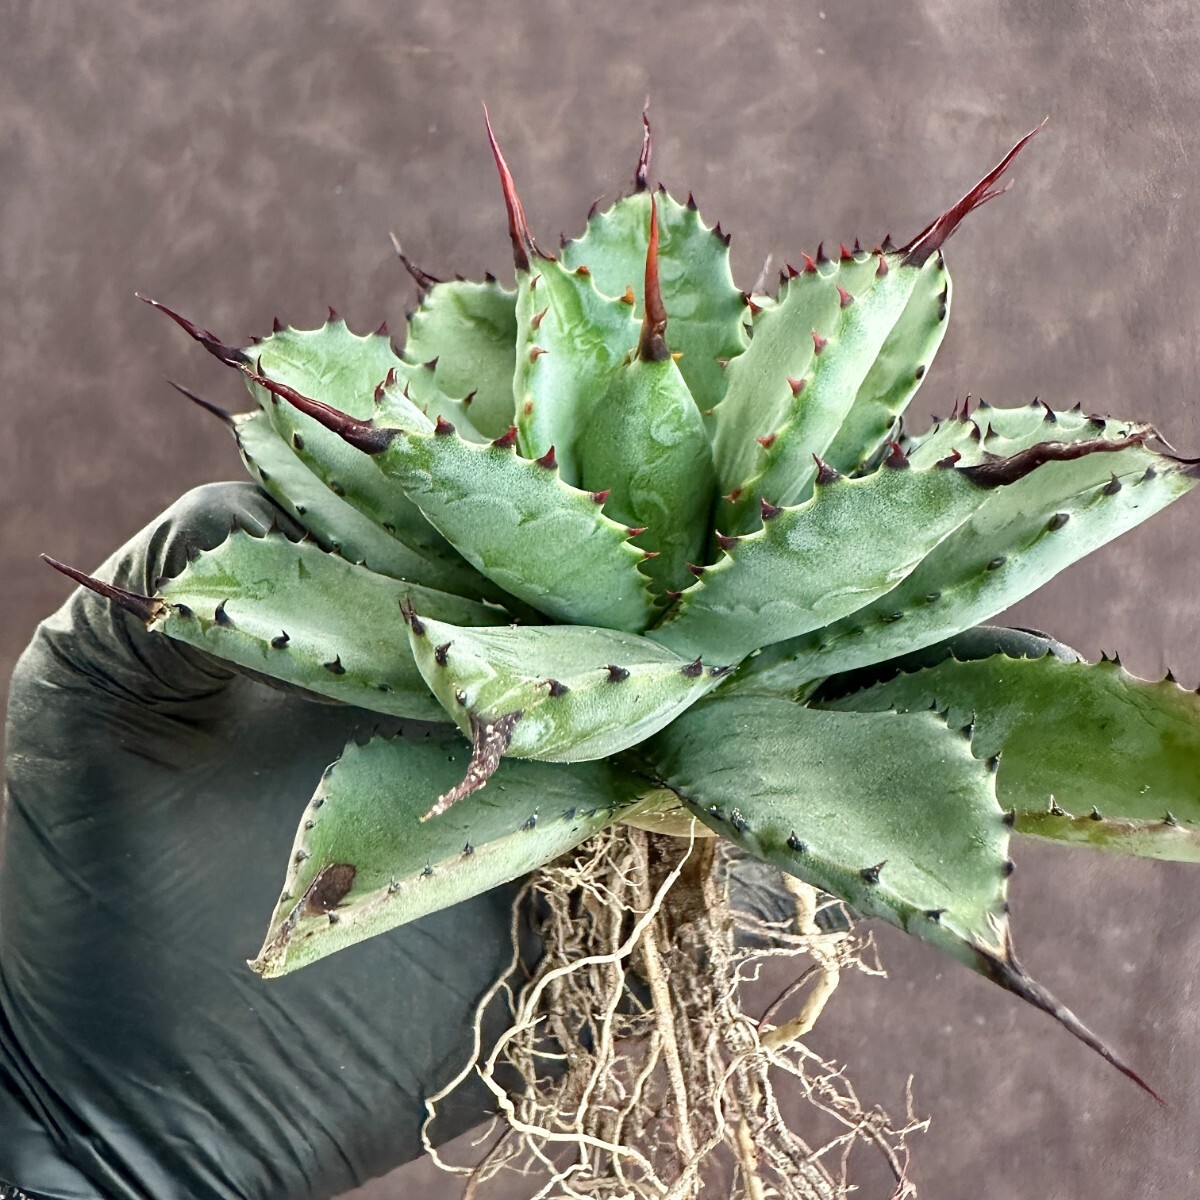 [Lj_plants]W183 succulent plant agave a little over bending ... a little over . madness . finest quality stock super rare stock carefuly selected finest quality stock 